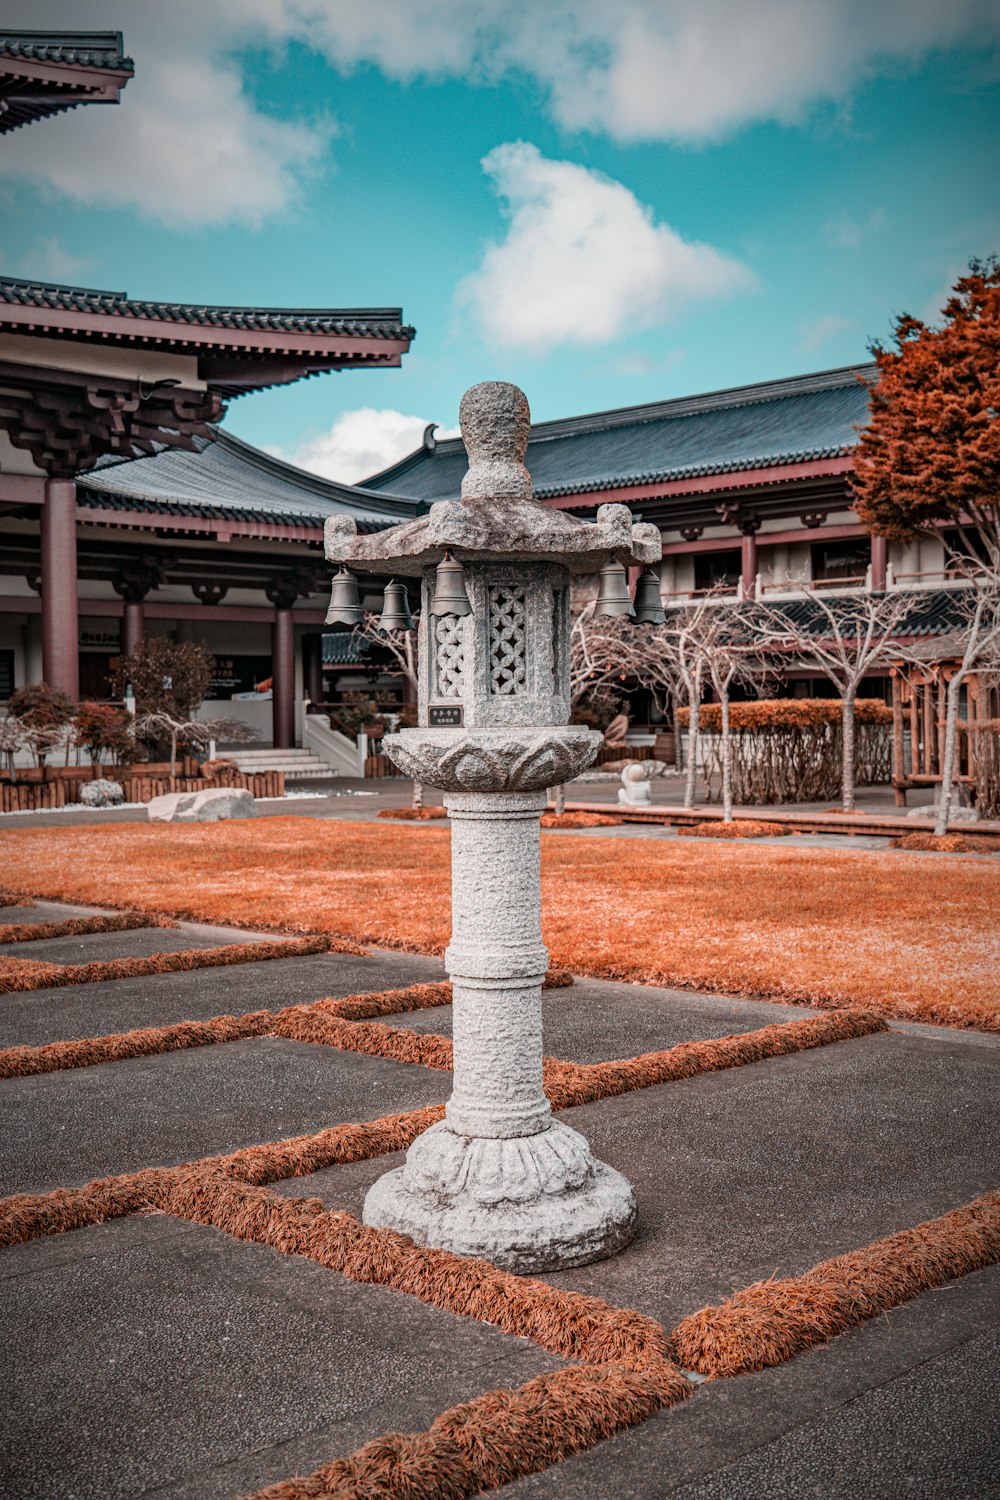 a stone lantern in the middle of a courtyard